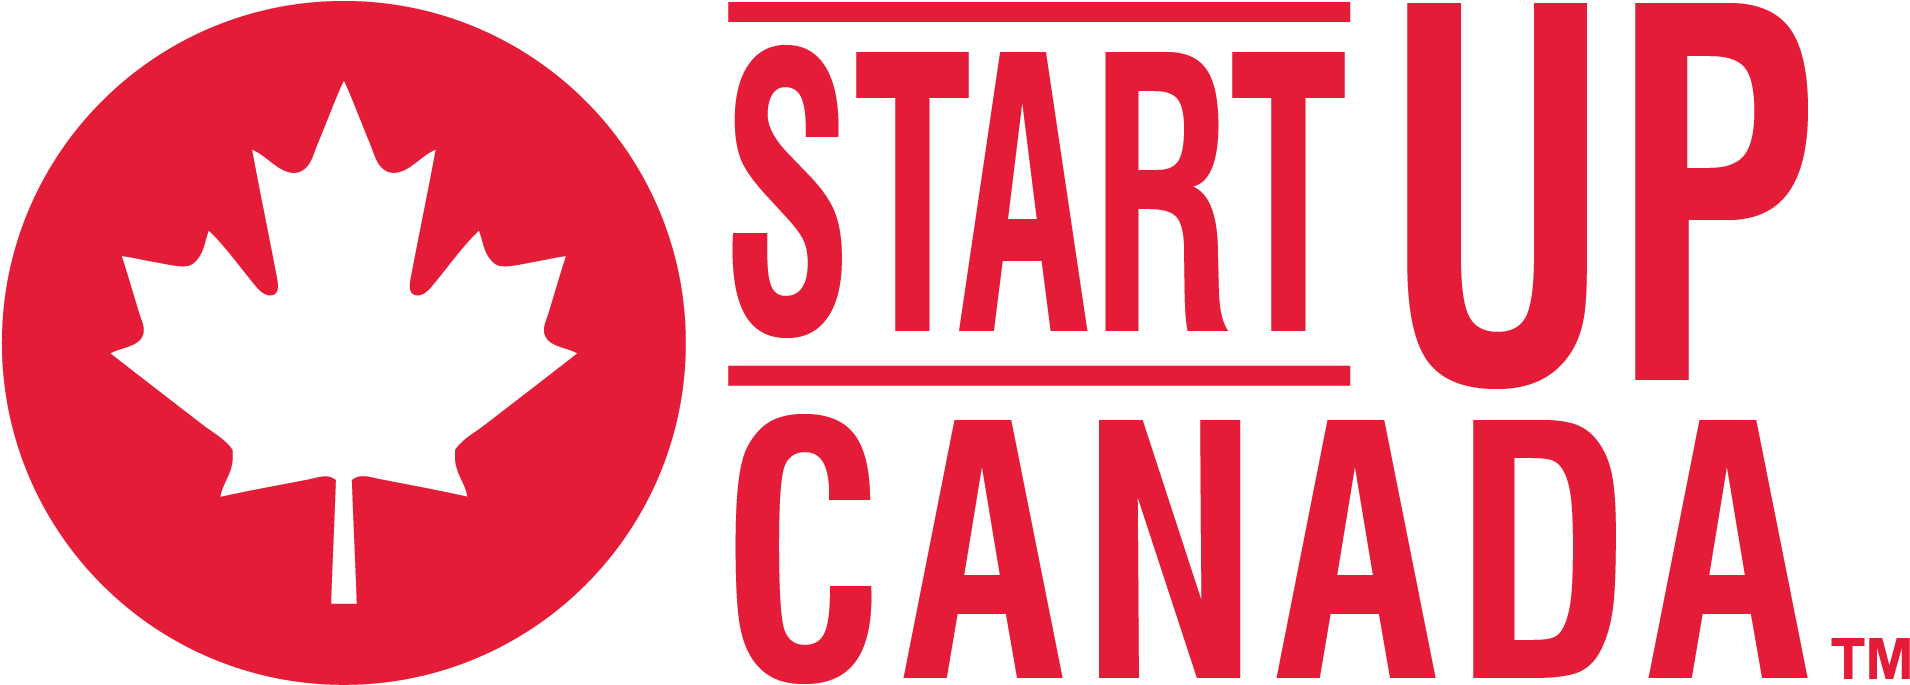 Thanks To The Immigration Policies Of Donald Trump - Start Up Canada (1920x1080), Png Download